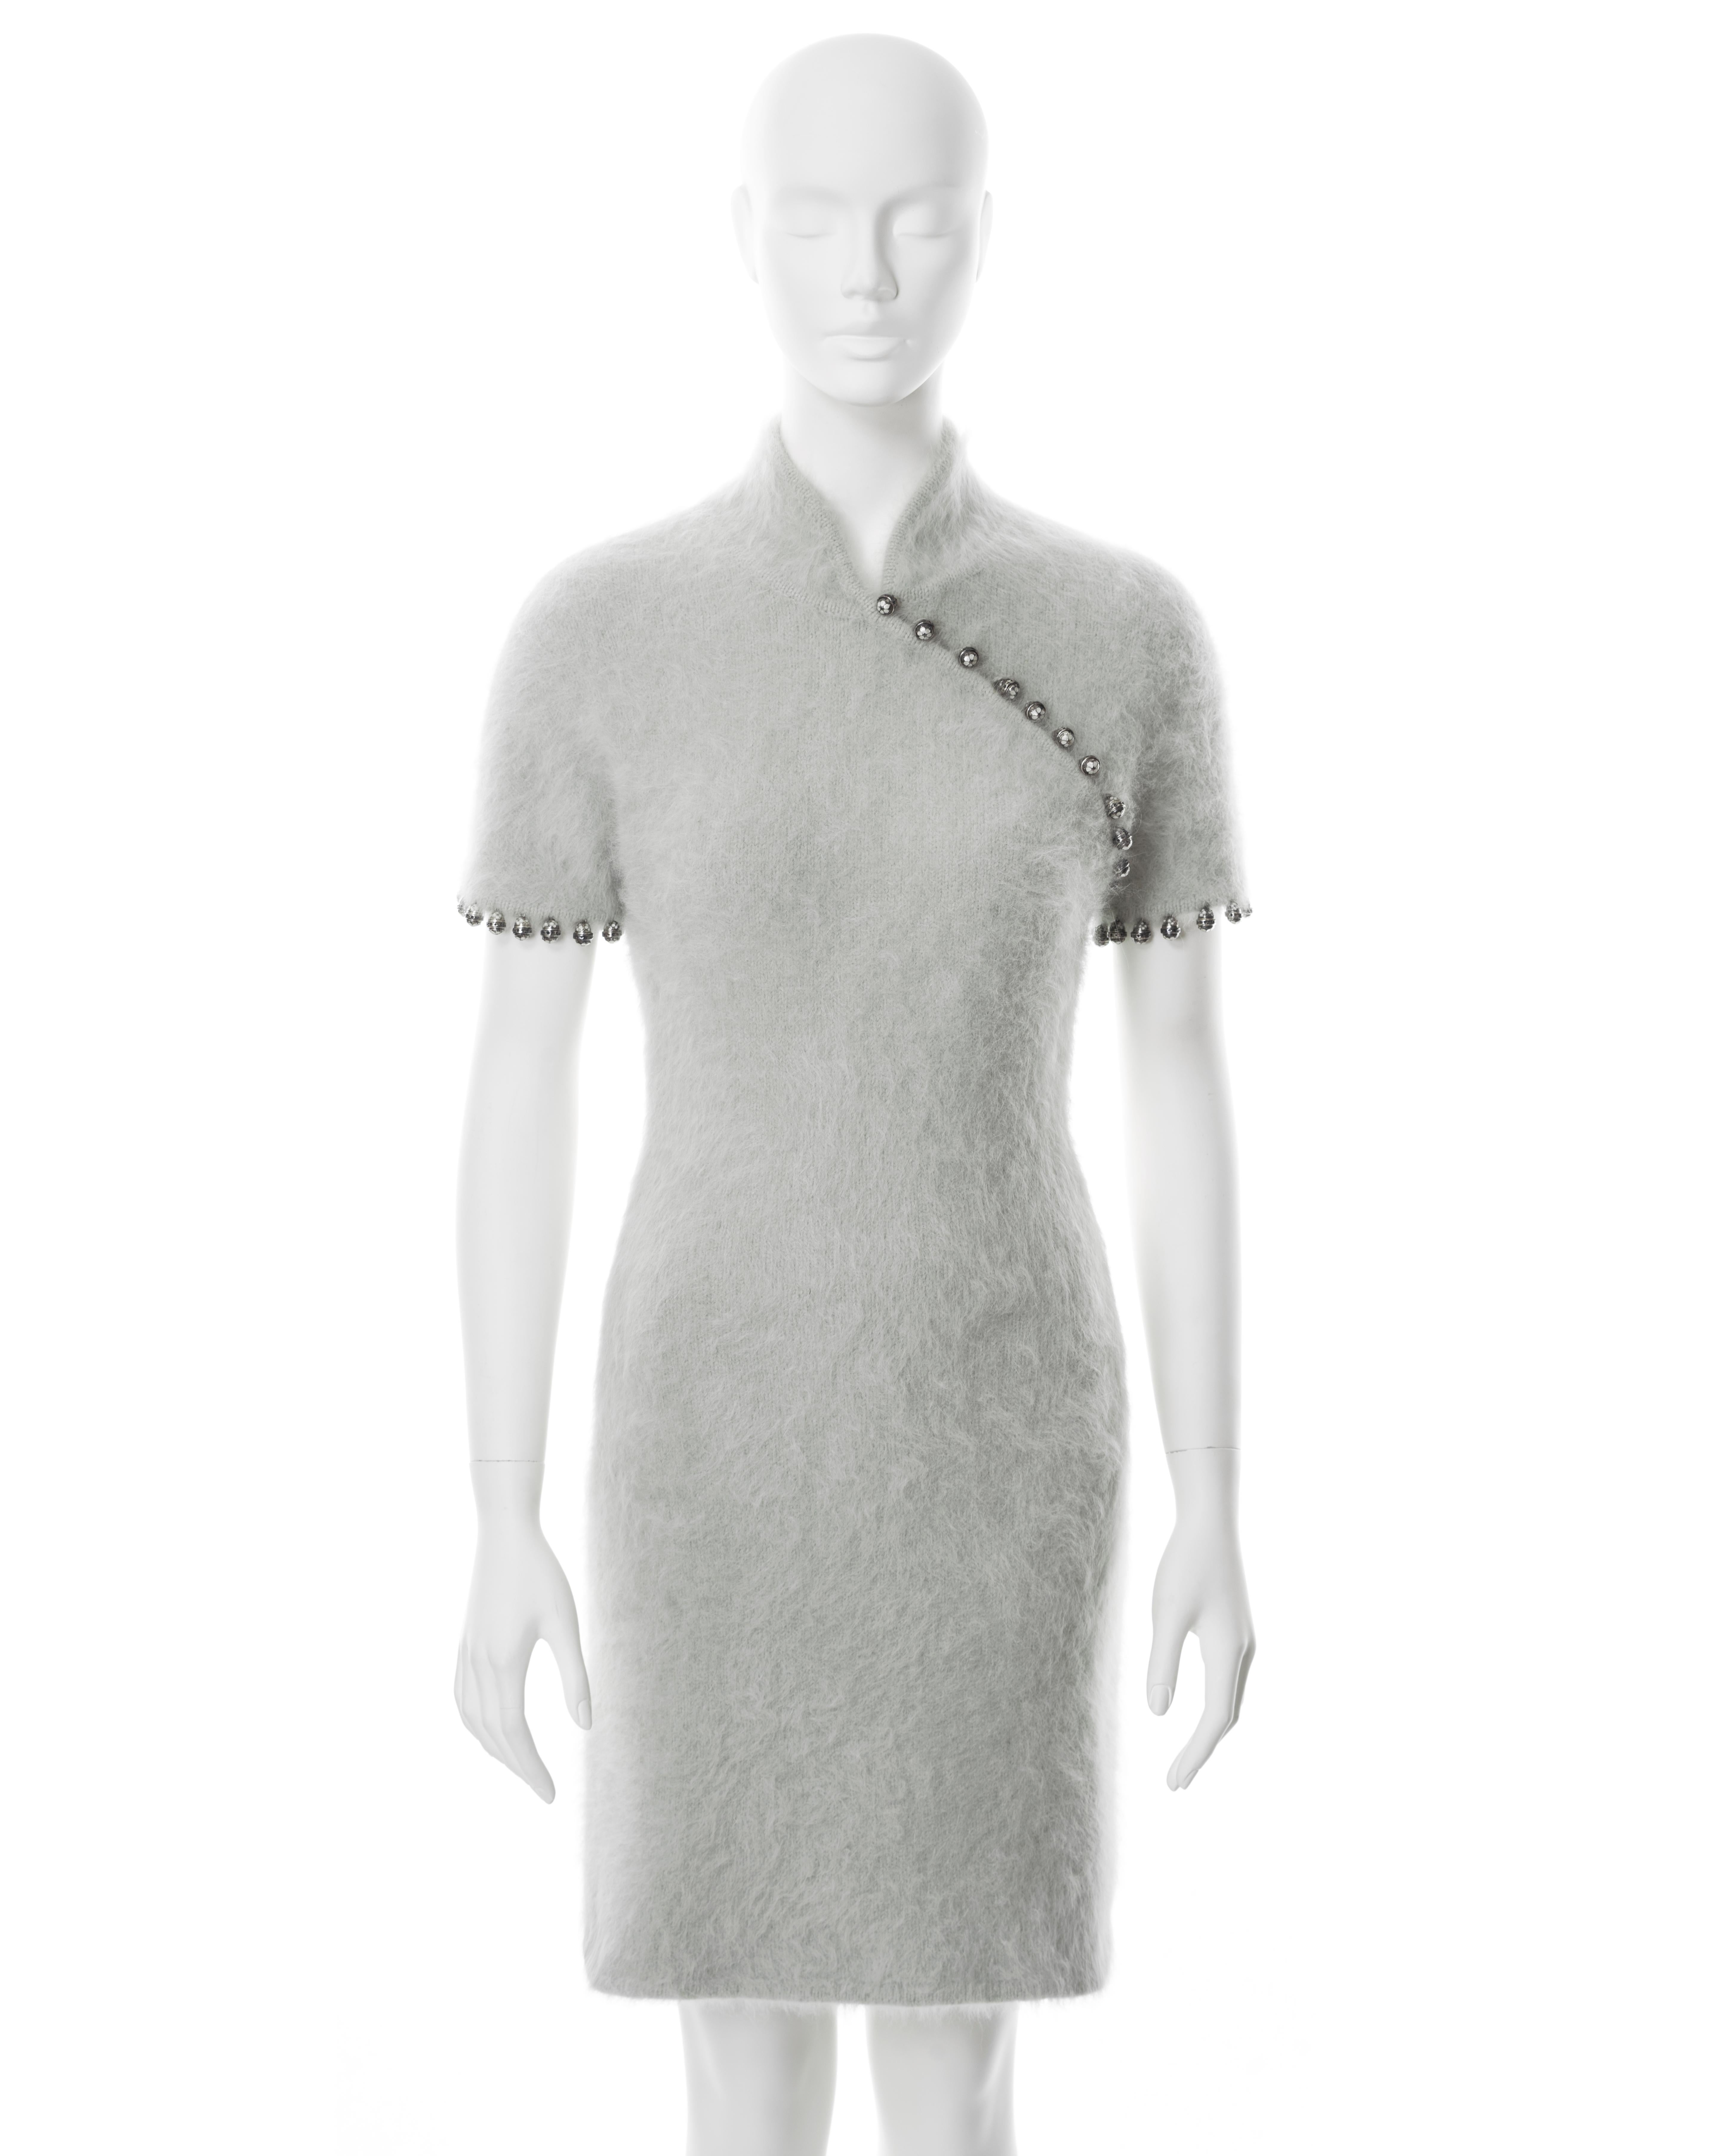 ▪ Christian Dior mint cheongsam-style dress
▪ Designed by John Galliano
▪ Sold by One of a Kind Archive
▪ Fall-Winter 1997
▪ Constructed from a fuzzy Angora and Wool knit fabric
▪ Asymmetric button-up neckline
▪ Standing collar 
▪ Figure-hugging fit